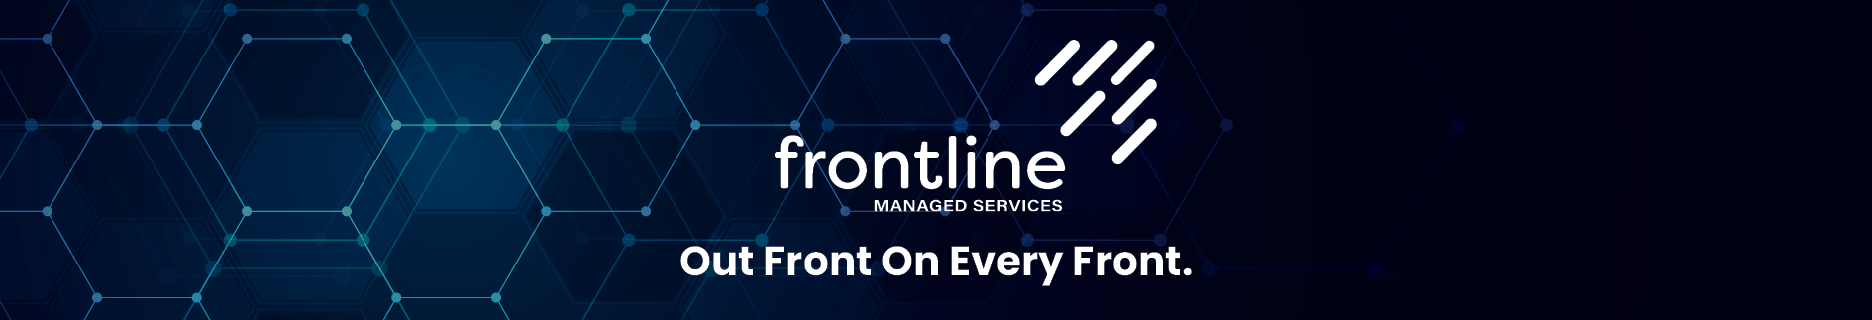 Frontline Managed Services Frontline Managed Services